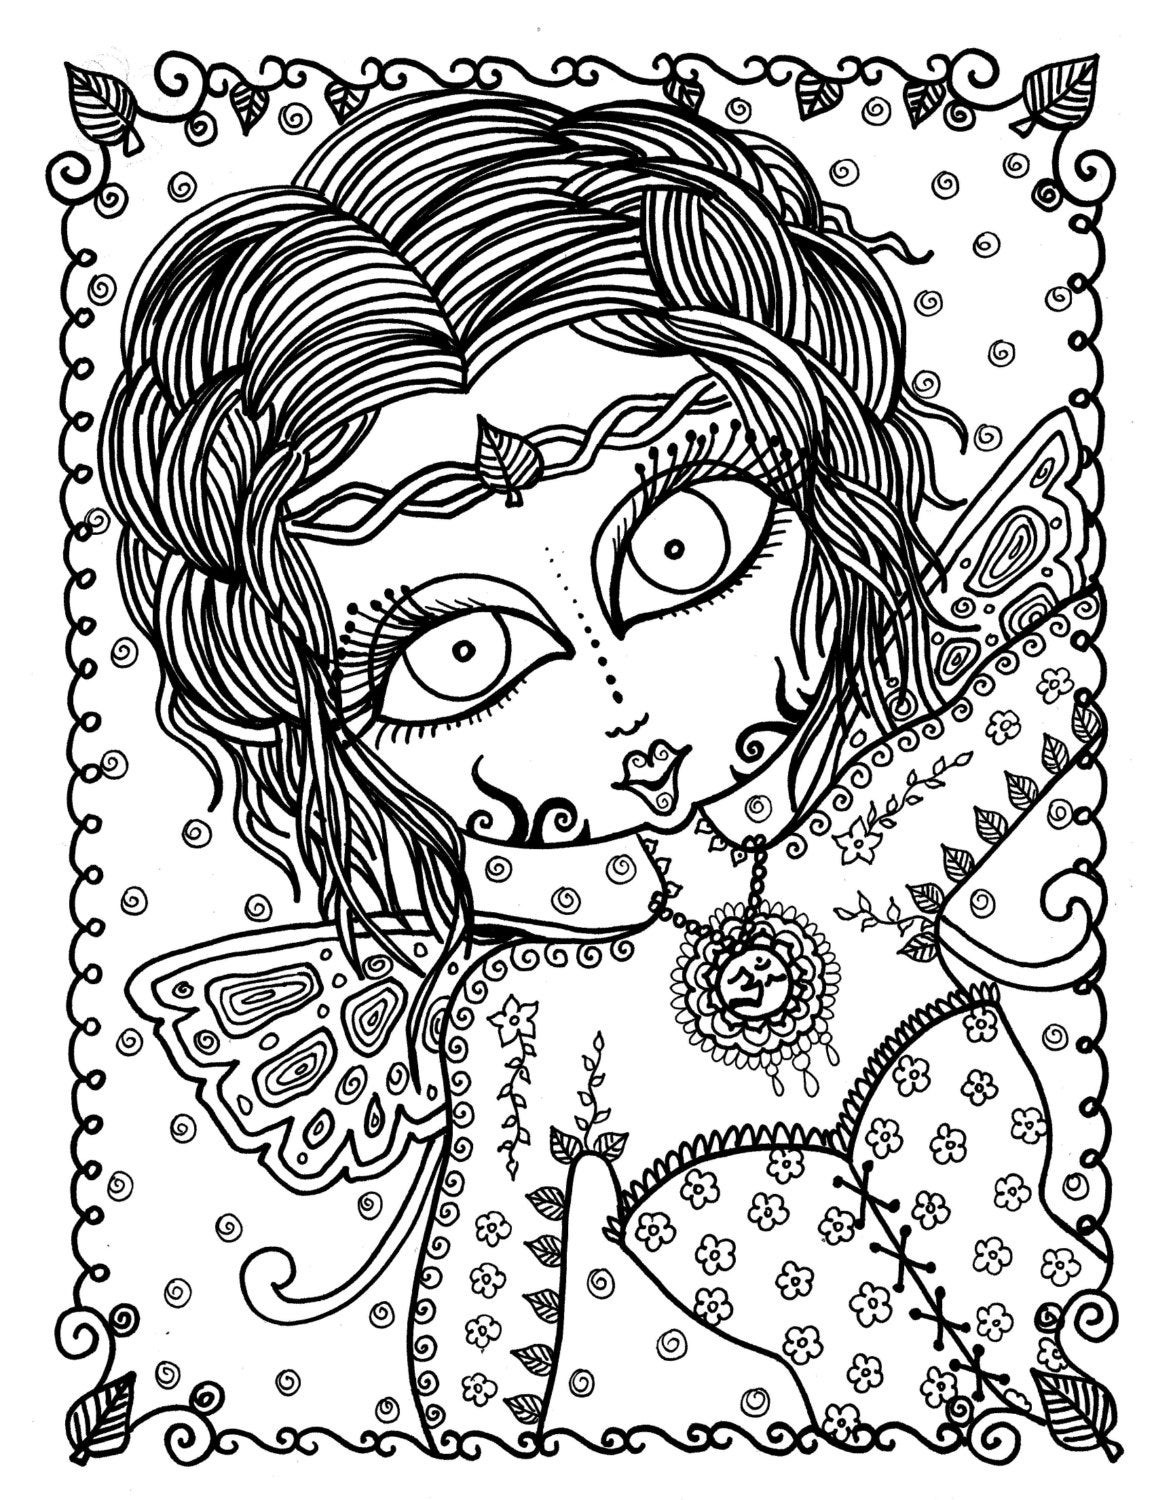 Adult Coloring Pages Fairy
 Zen Fairy Adult coloring page Instant Download Fairies to